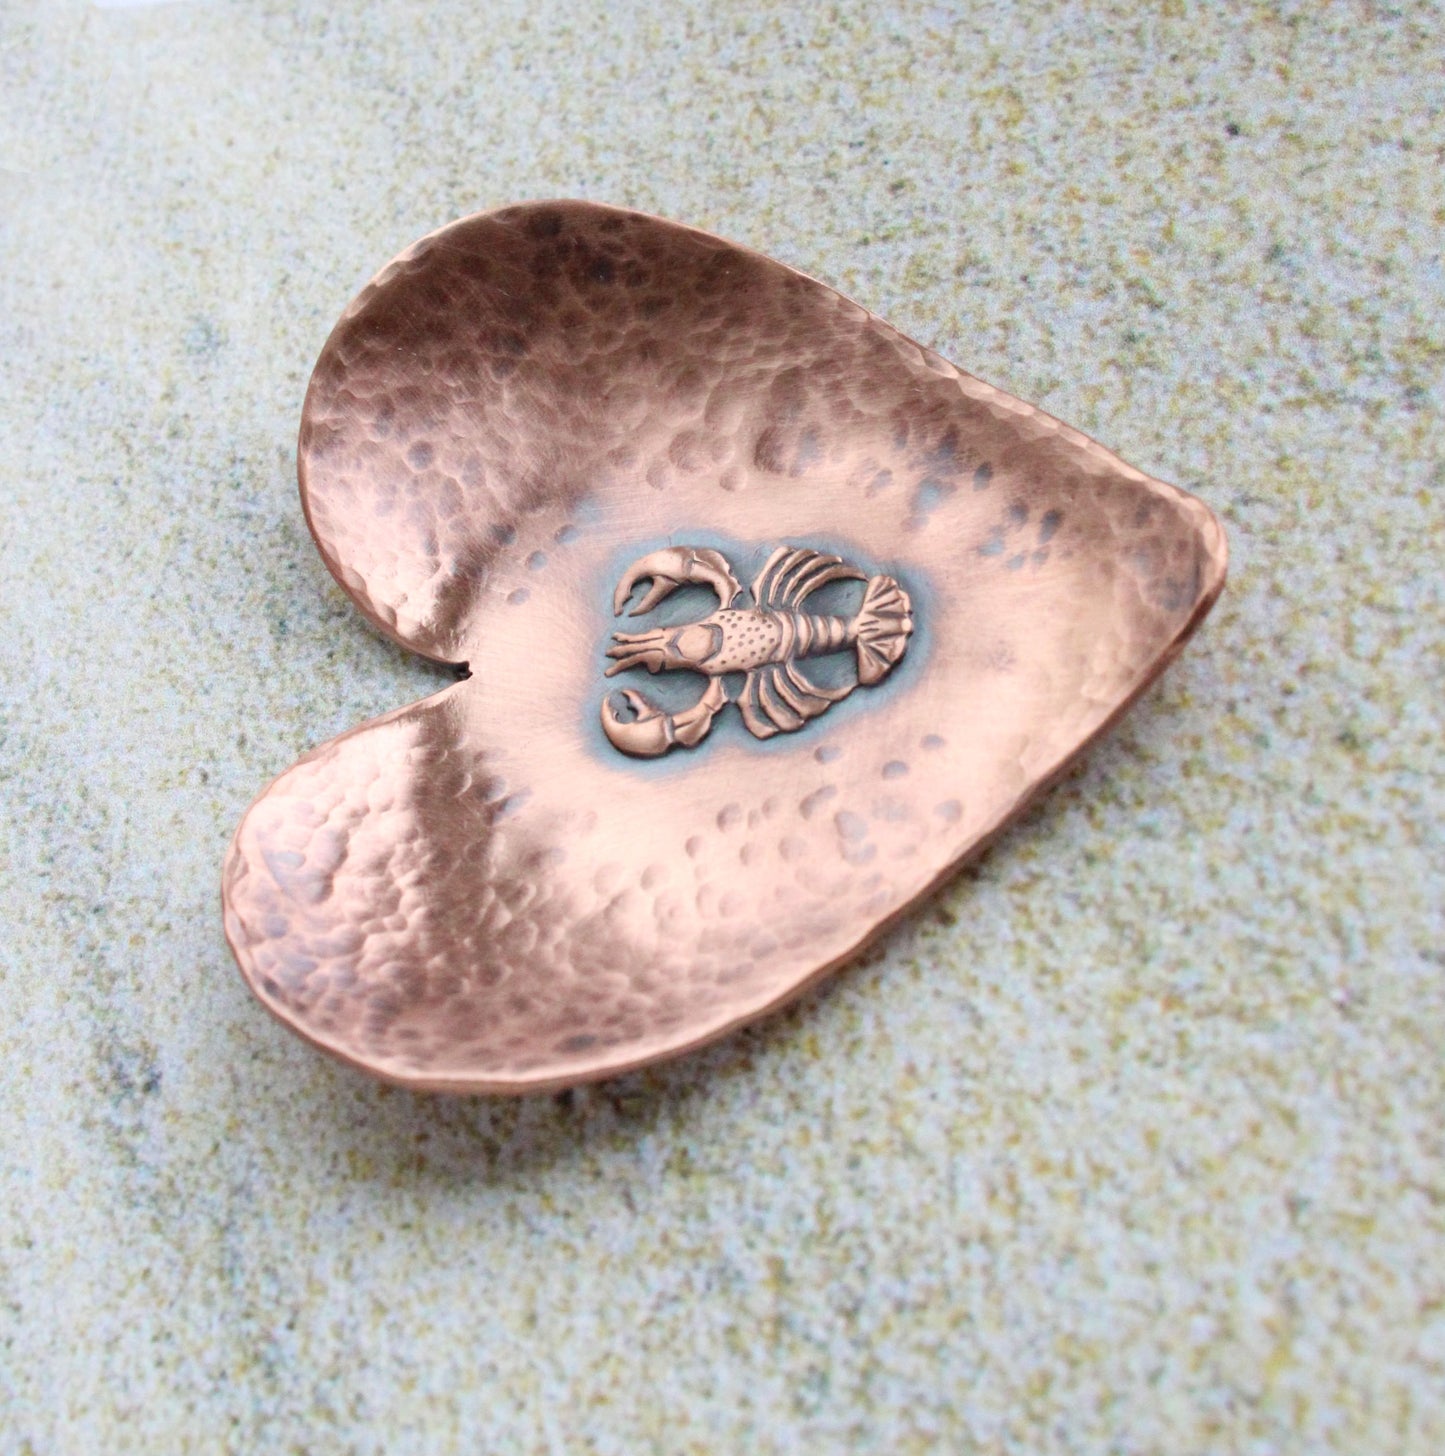 A small 2 inch heart shaped copper ring or trinket dish. There is a raised detailed impression of a lobster in the middle and hammered texture around the edge. The bottom is flat and the three points of the heart are gently curved up. The bowl is oxidized to enhance the details of the lobster and the hammer marks.